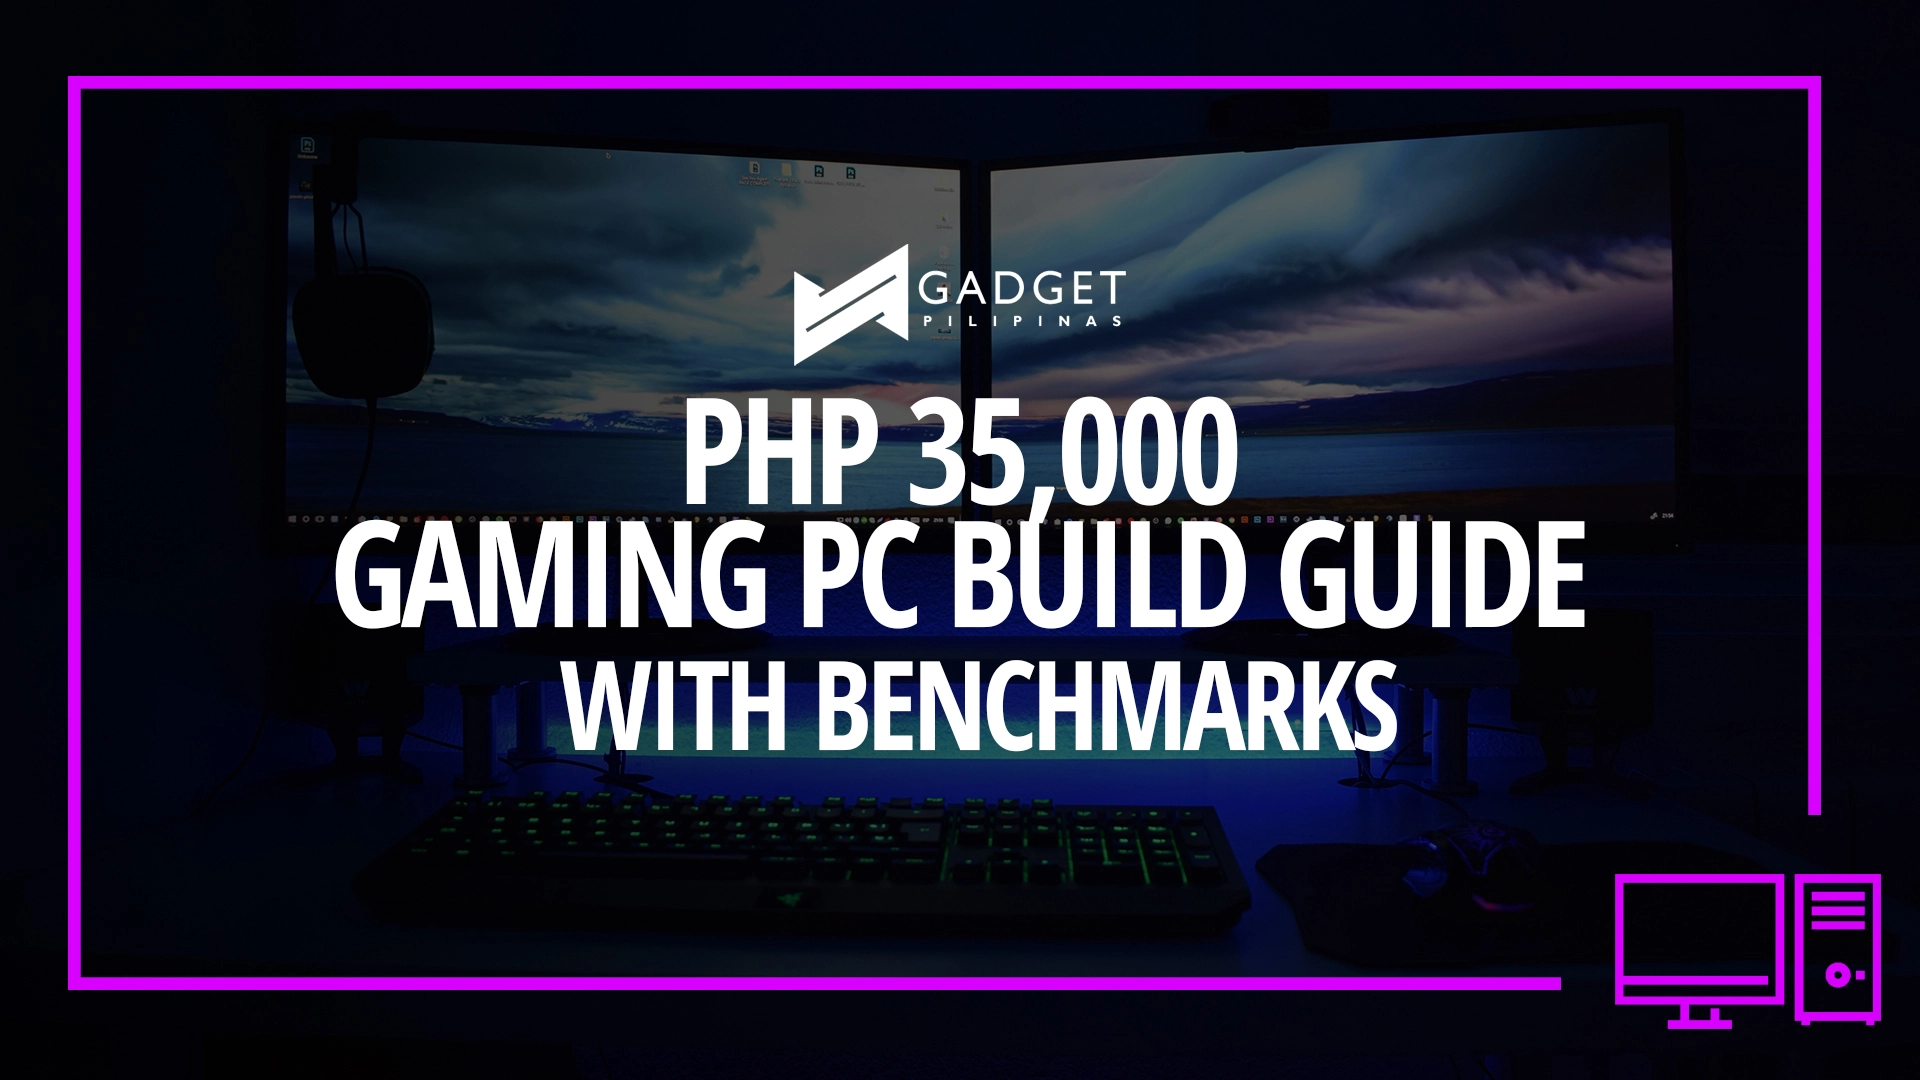 Php 35K Gaming PC Build Guide With Benchmarks (Aug 2020) – Ryzen 3 3300X + GTX 1650 SUPER